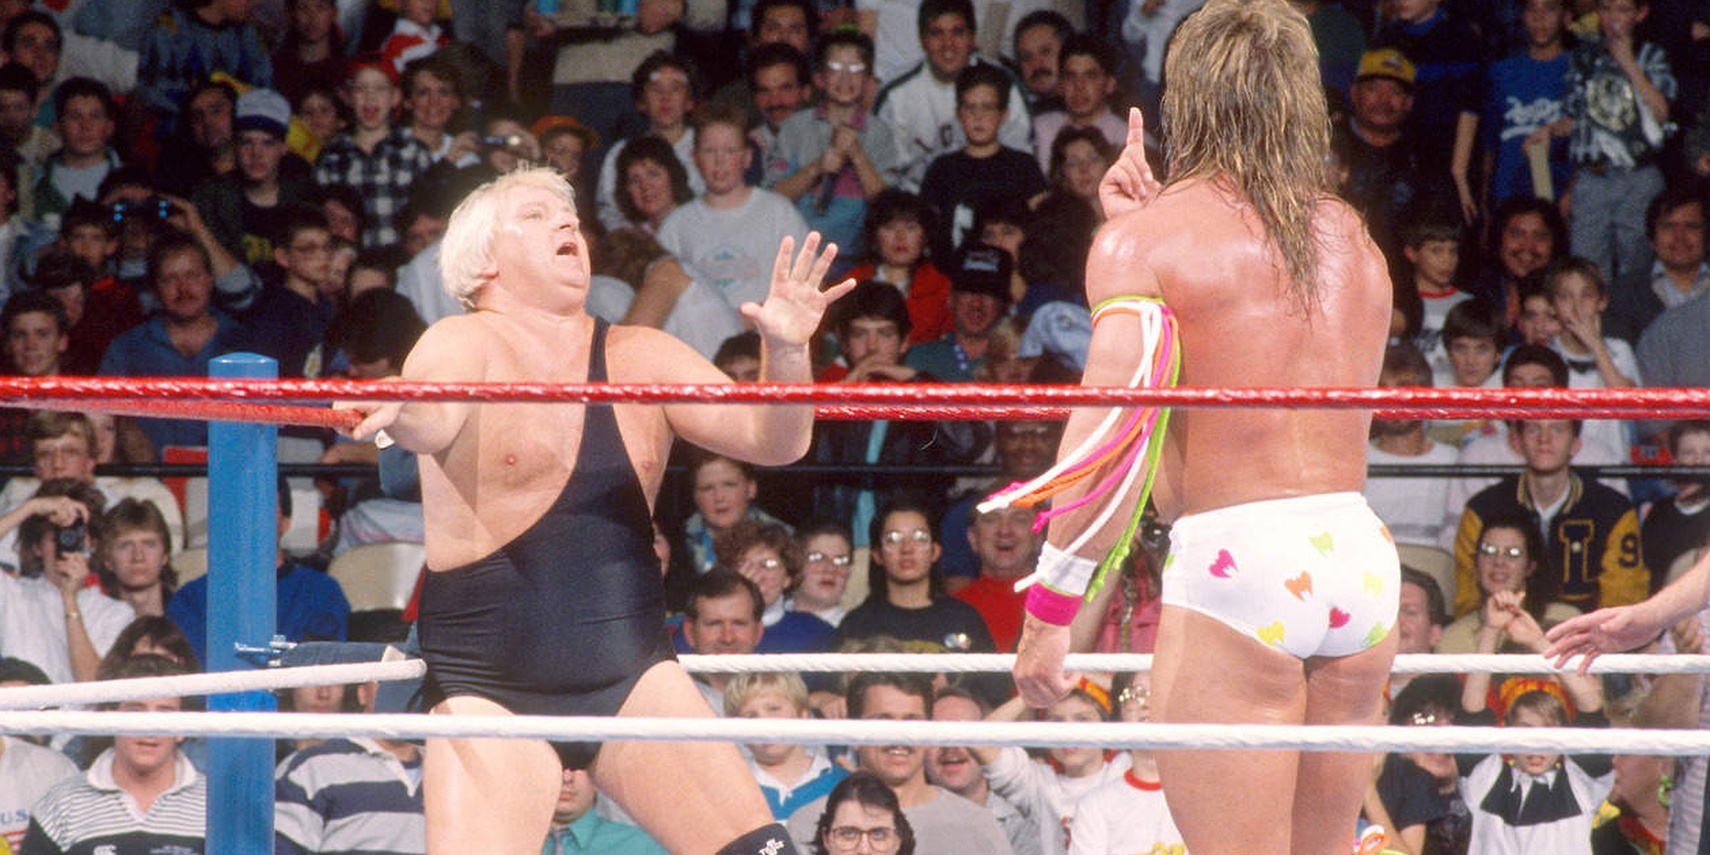 The Ultimate Warrior sizes up Bobby Heenan as the cowardly manager begs in the corner.